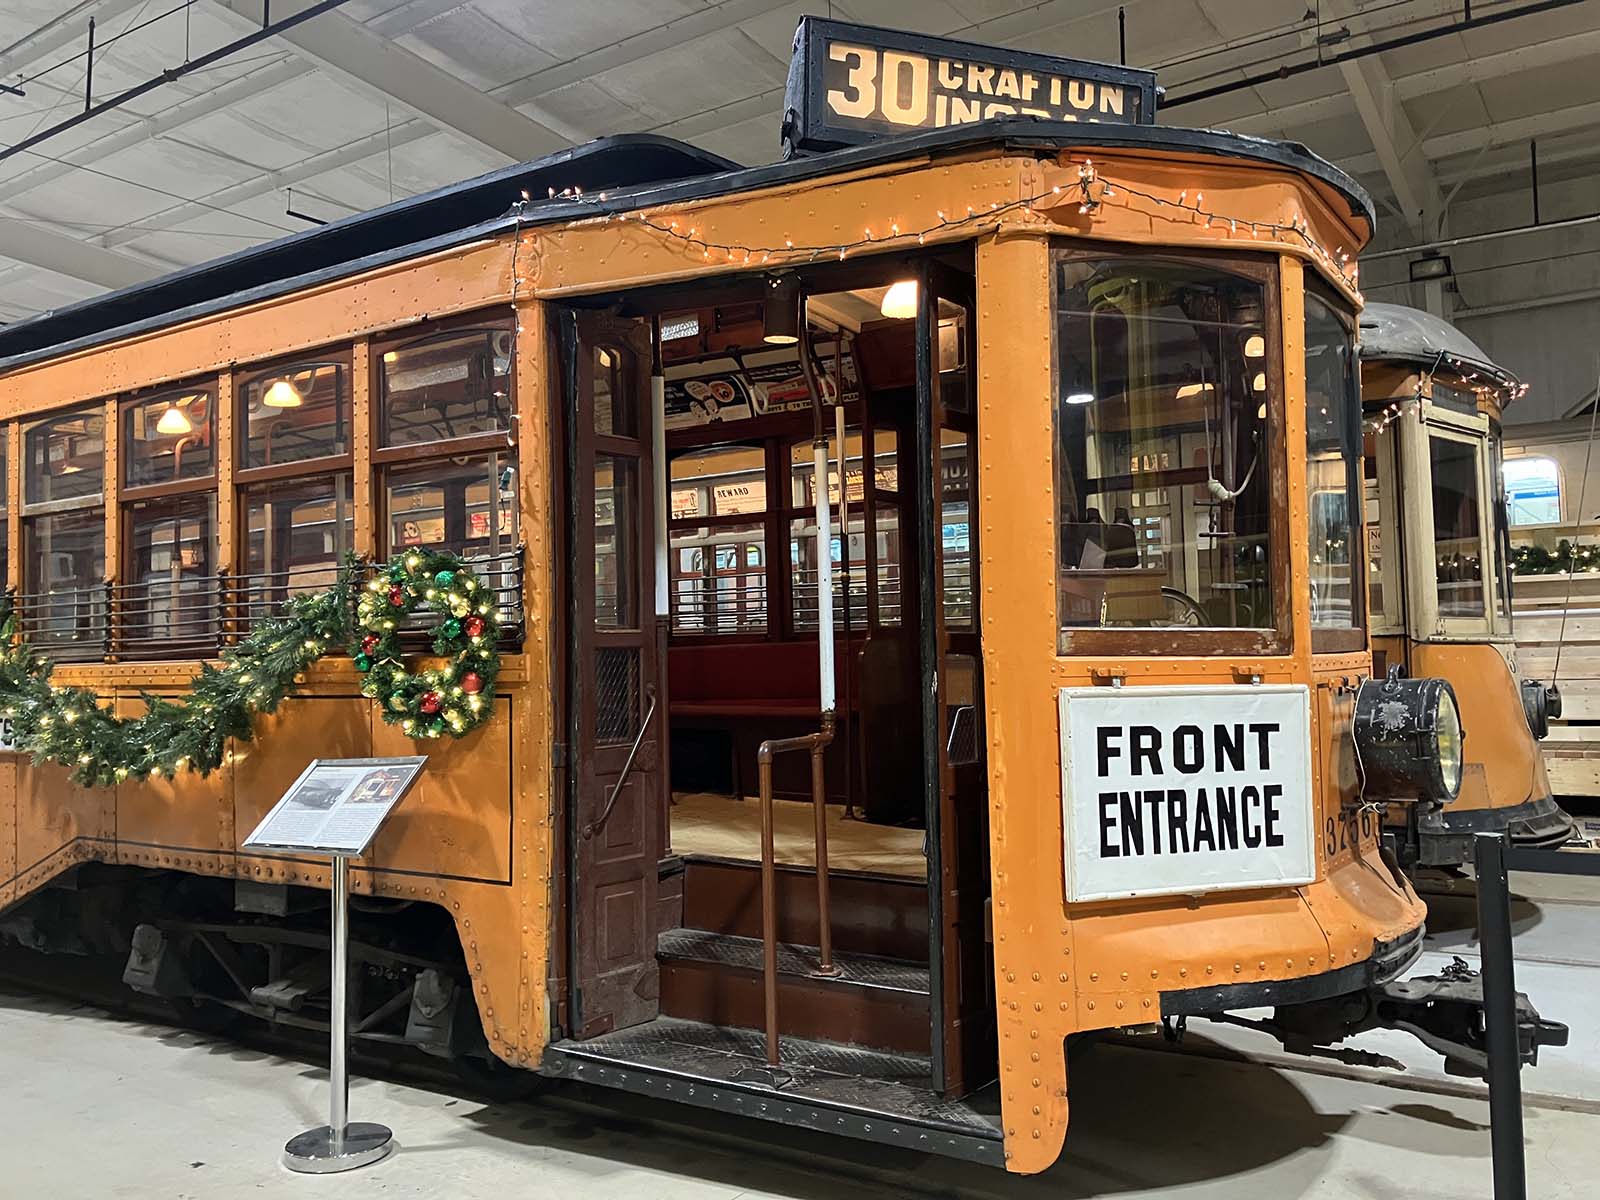 An orange trolley with an open door is decorated for the holidays with lit garlands.